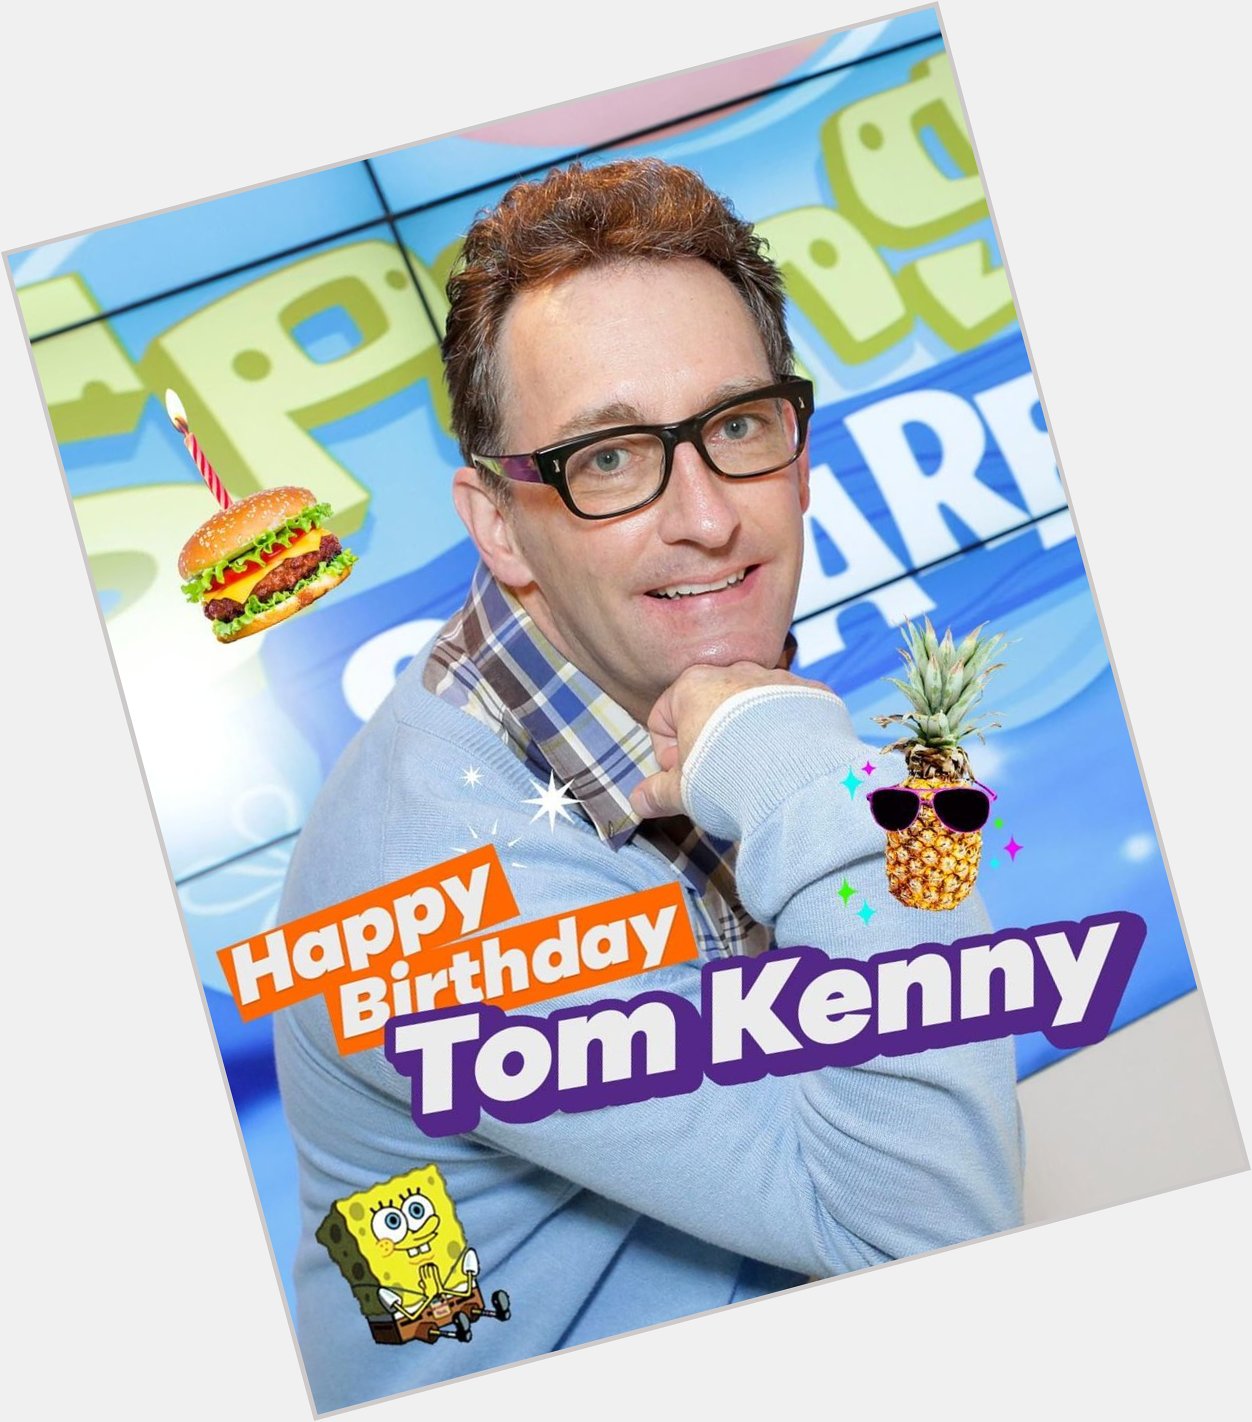 Happy happy birthday  to the best guy to ever voice our little buddy spongebob, Tom Kenny 